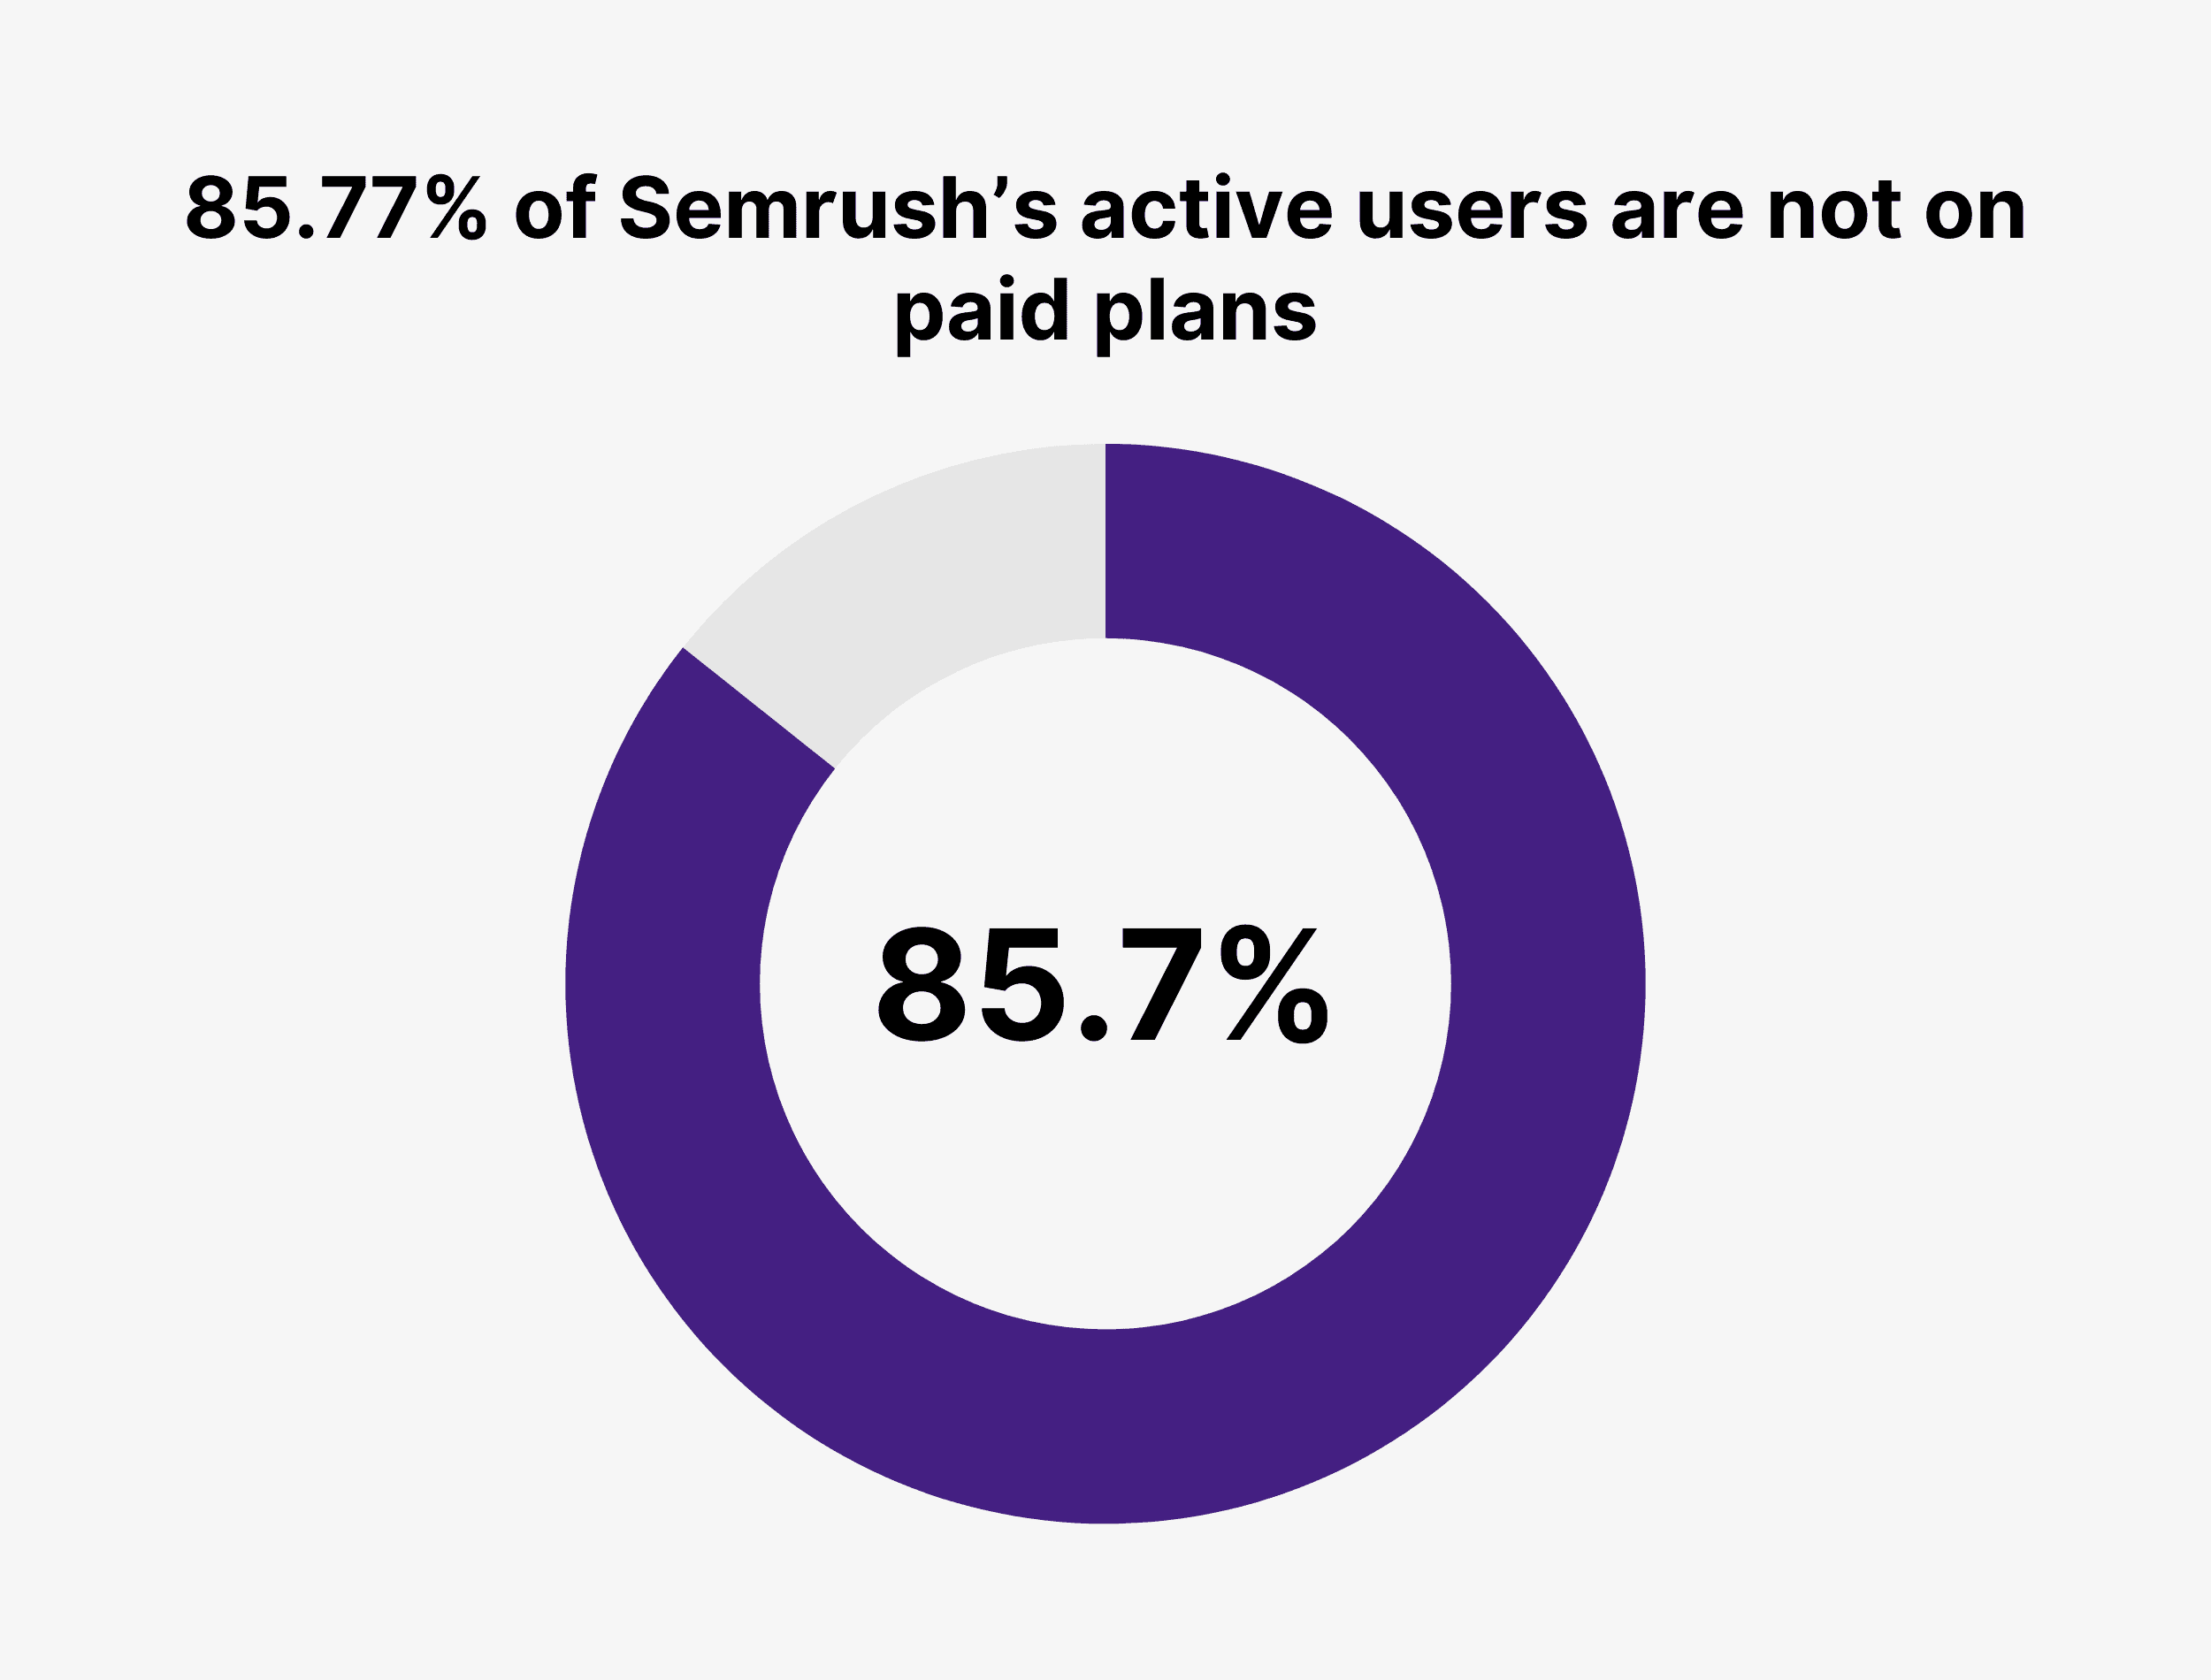 85.77% of Semrush’s active users are not on paid plans